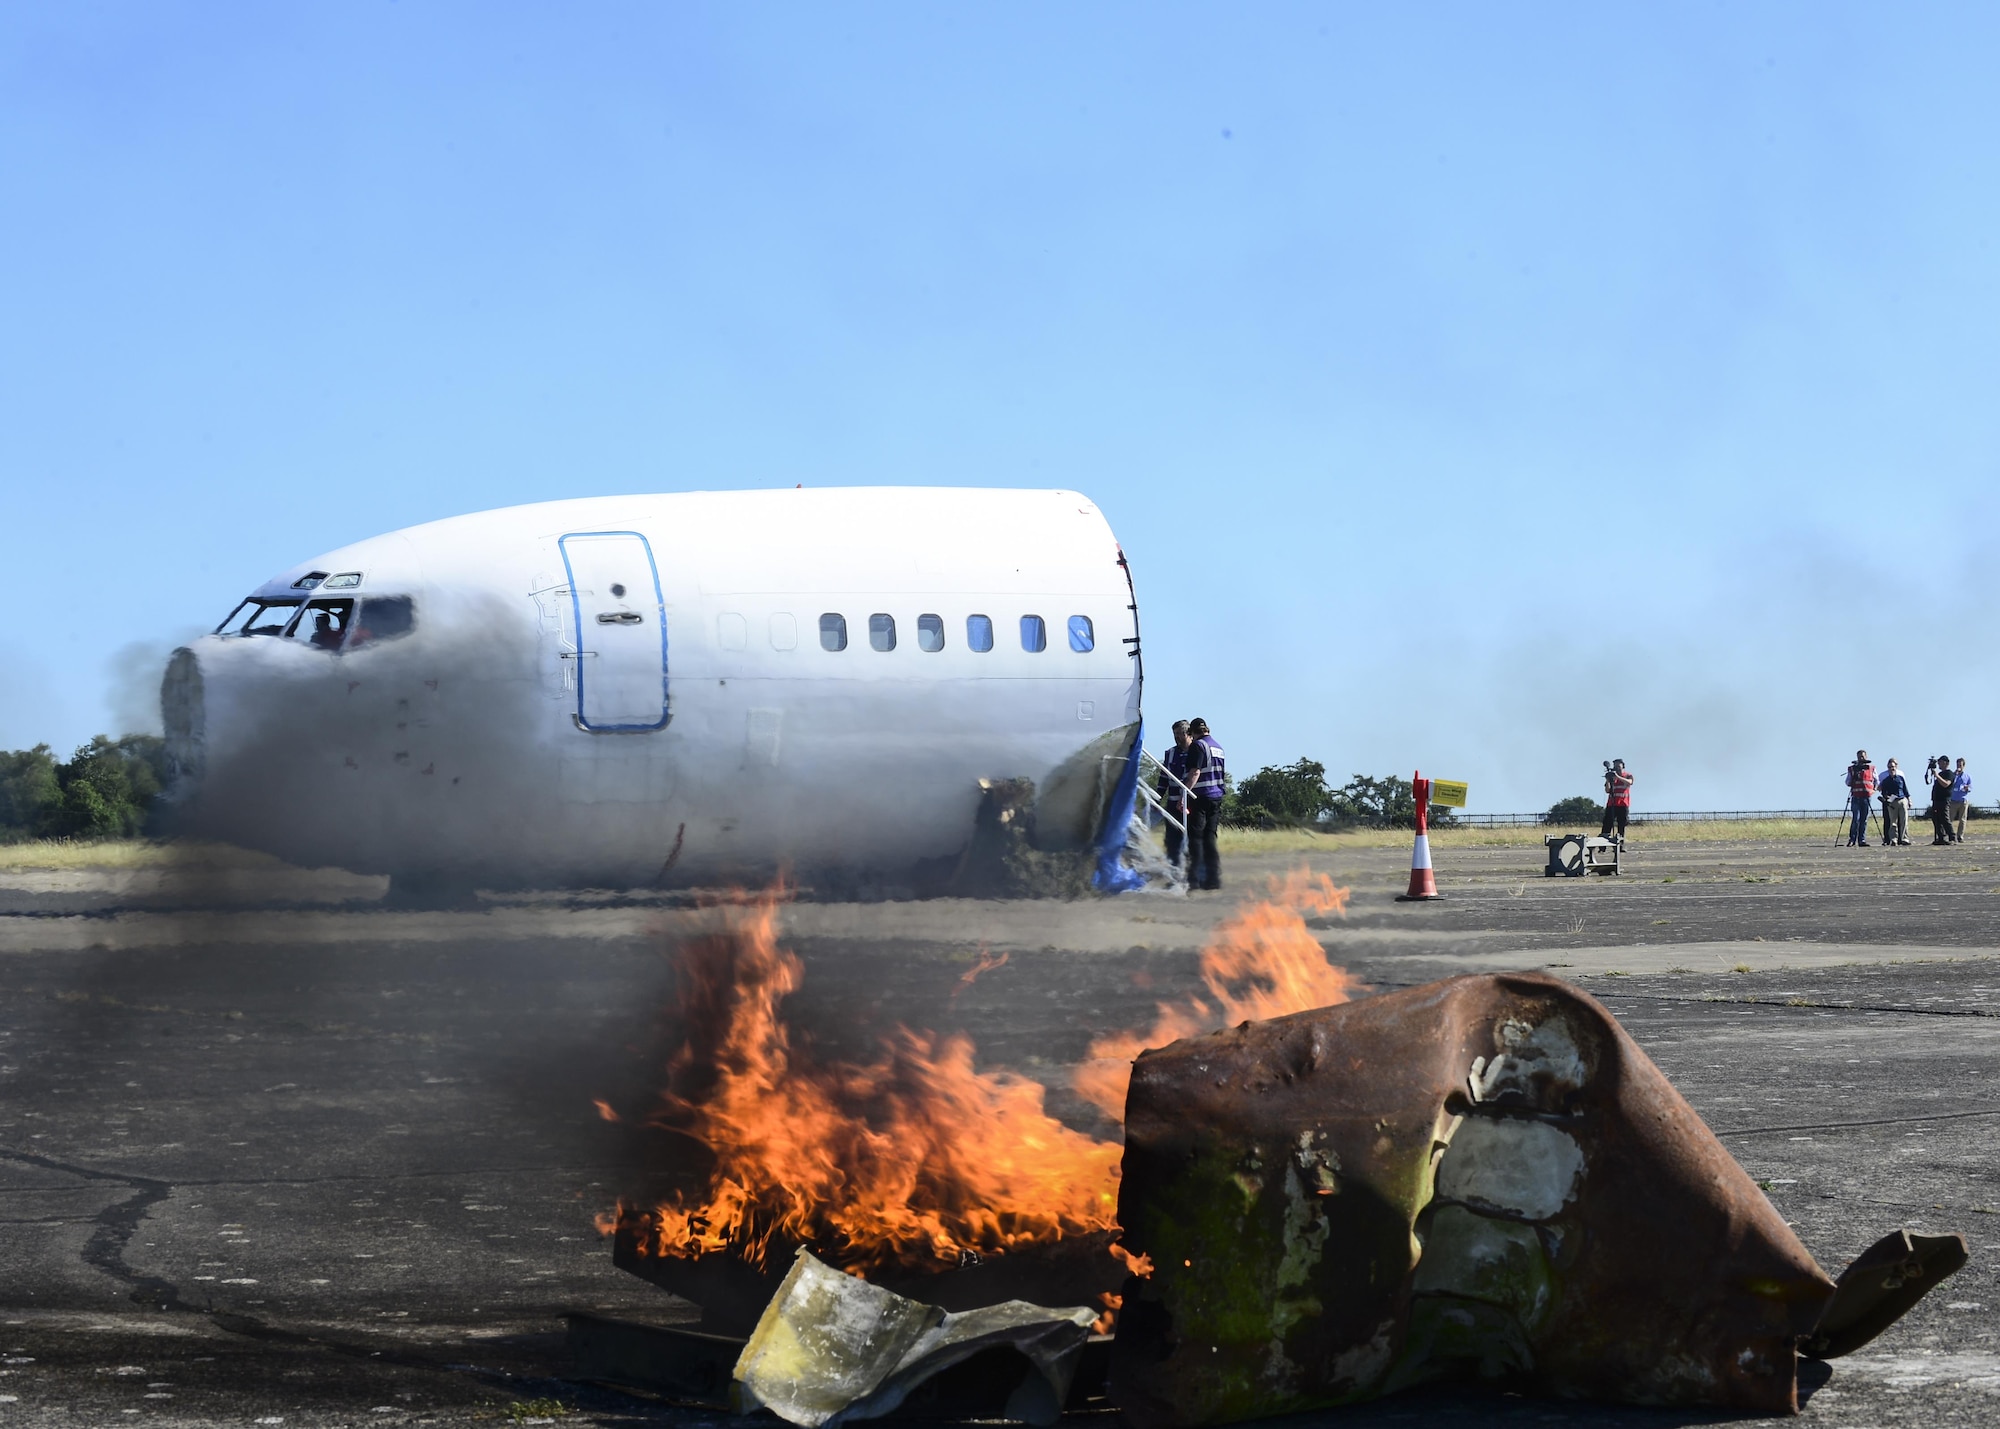 Fiery debris and a simulated aircraft crash cover the flightline during exercise Diamond Dragon at Royal Air Force Honington, England, June 30, 2015. Diamond Dragon is a three-day joint forces response exercise that readies members of the U.K. Ministry of Defence, emergency response agencies and the U.S. Air Force for incidents that require help from both nations. (U.S. Air Force photo/Senior Airman Nigel Sandridge)